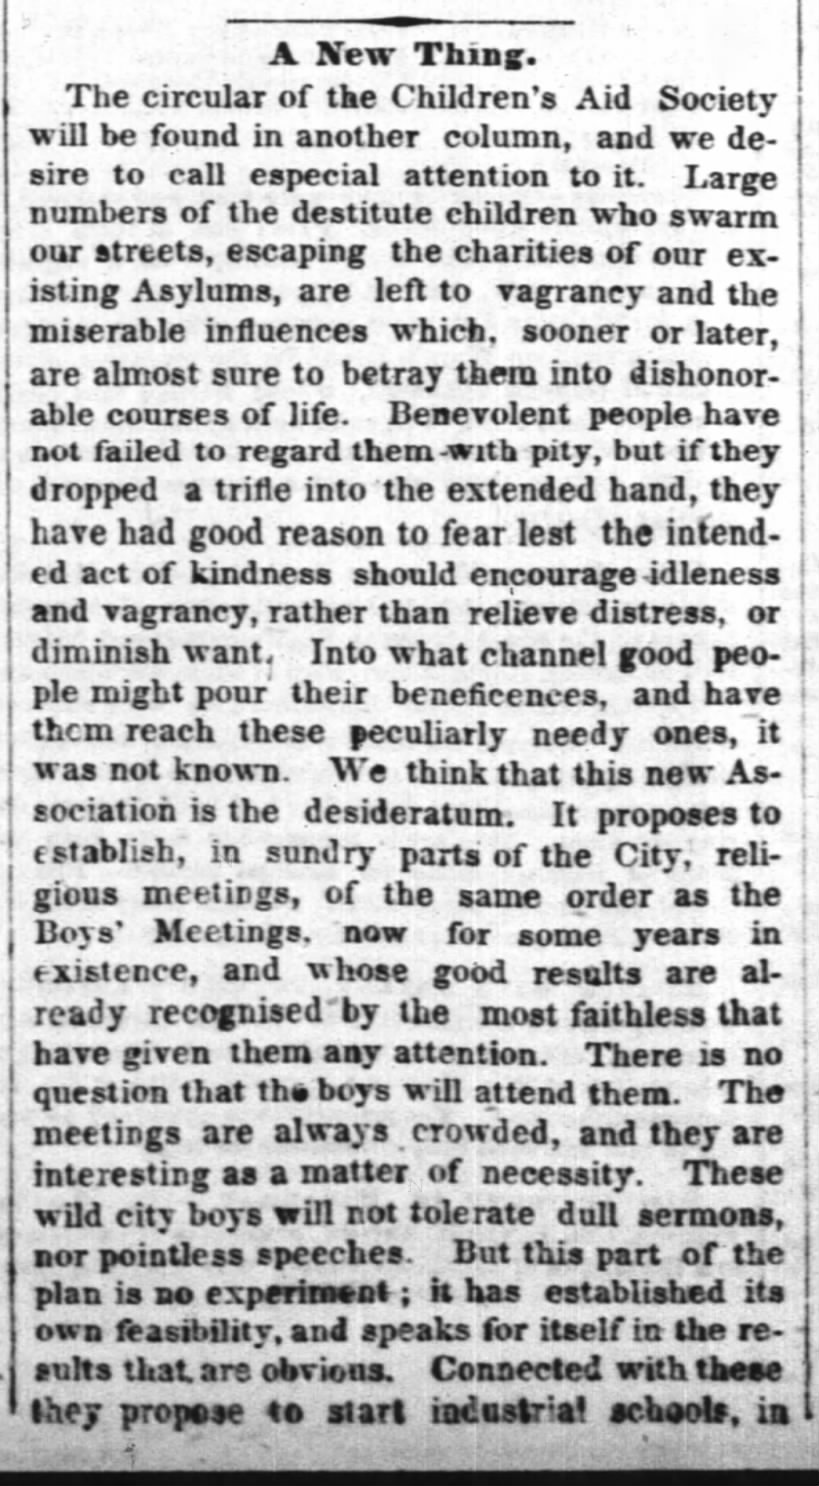 Children's Aid Society formed in NY - March 1853